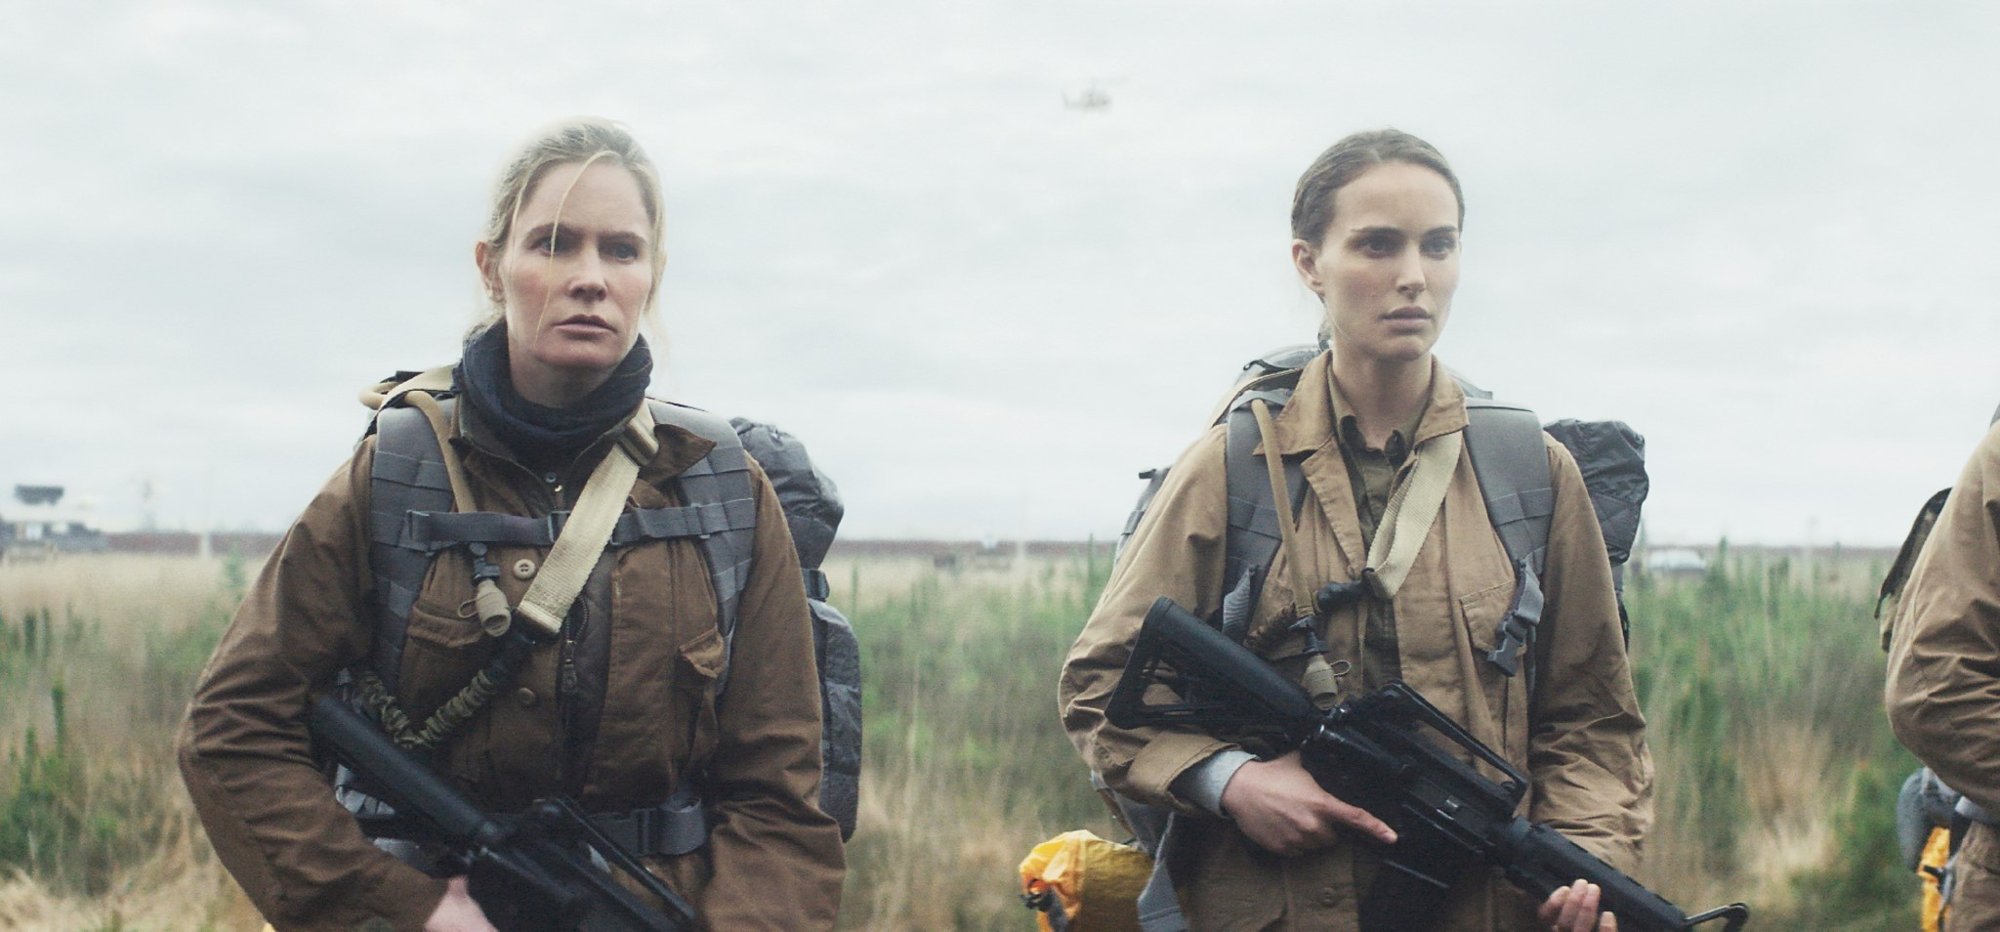 Jennifer Jason Leigh stars as Dr. Ventress and Natalie Portman stars as Lena in Paramount Pictures' Annihilation (2018)